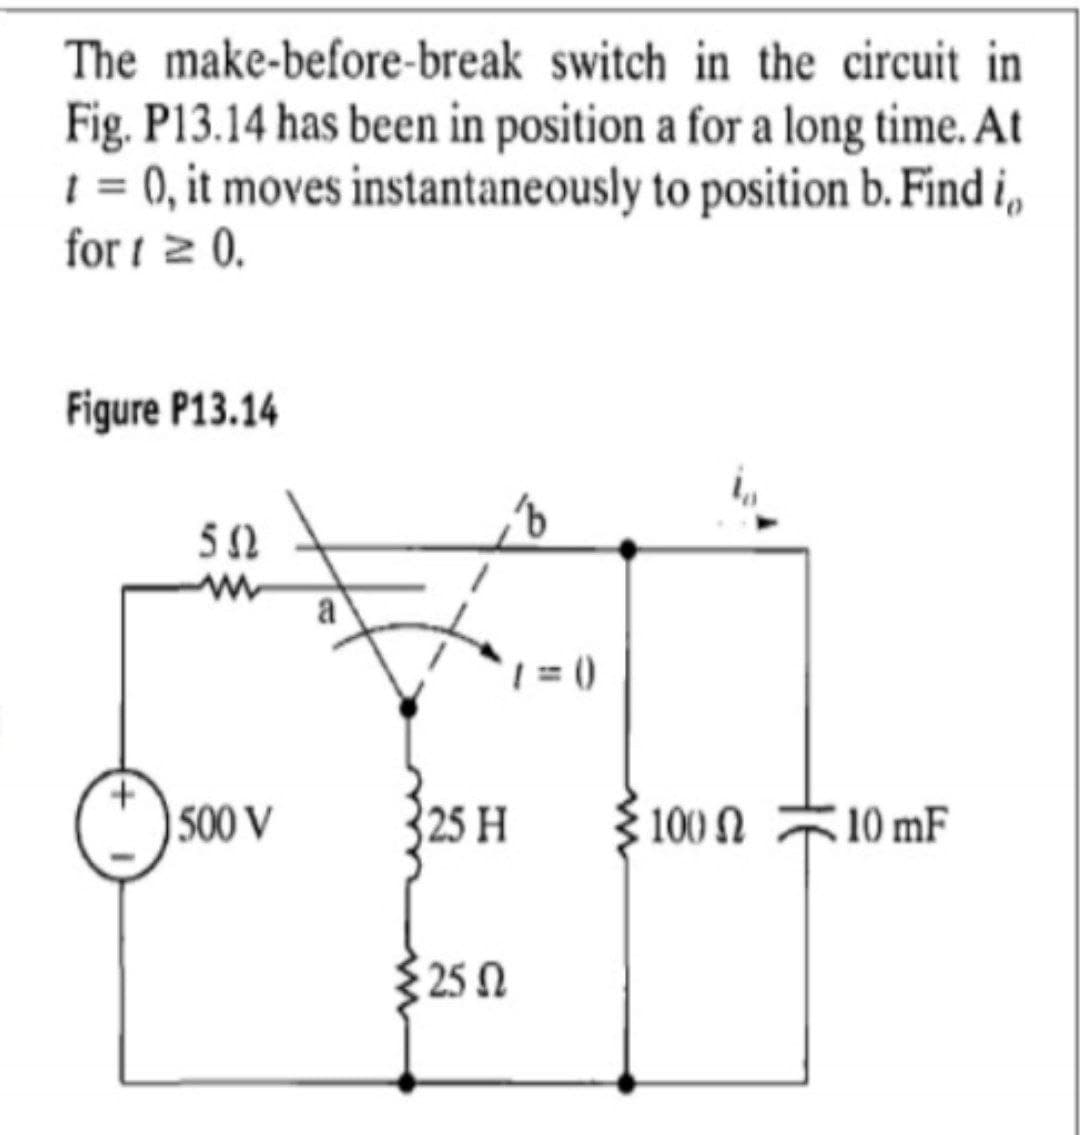 The make-before-break switch in the circuit in
Fig. P13.14 has been in position a for a long time. At
1 = 0, it moves instantaneously to position b. Find i,
for i 2 0.
Figure P13.14
50
a
|500 V
25 H
$ 100 N
10 mF
{ 25 N
